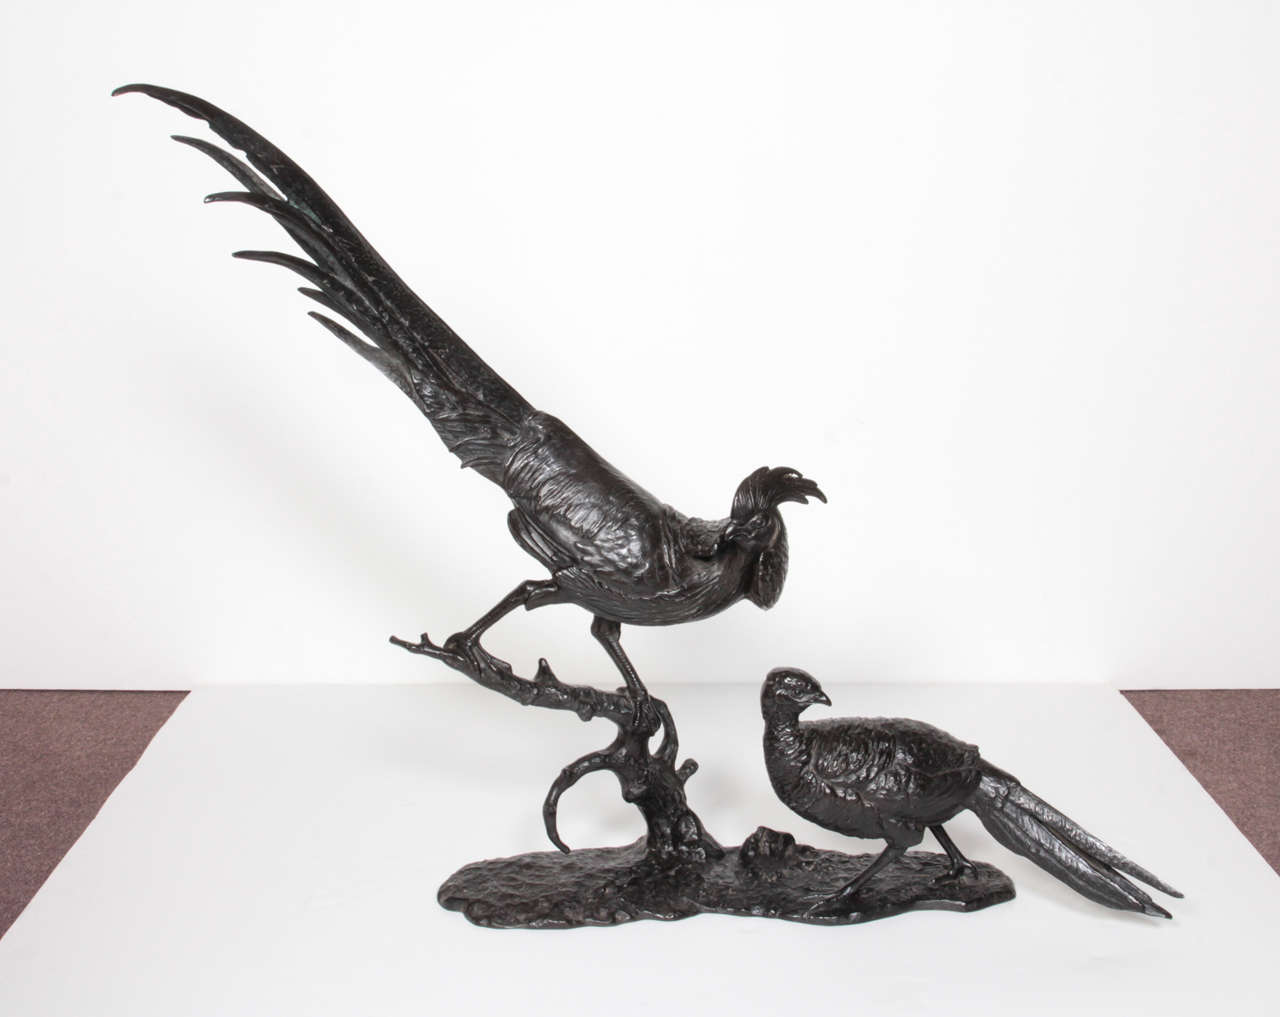 A finely cast original bronze grouping of a male and female pheasant in the style Japonaise with original patina- signed: A. Buschelberger
Large and important scale, beautiful execution, attentive detail, realistic rendering and of highly